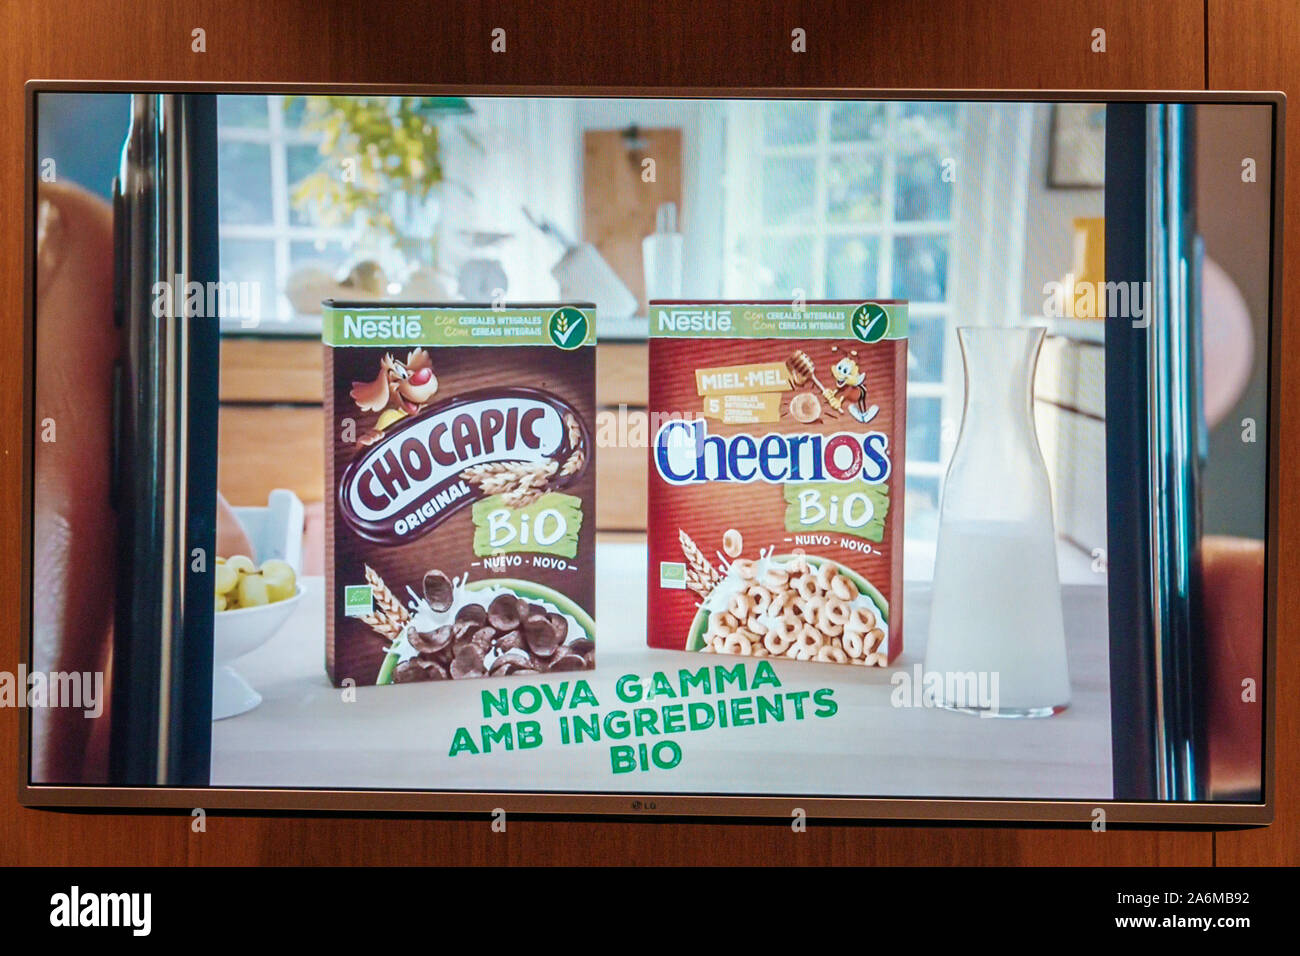 Barcelona Spain,Catalonia Catalunya,TV television screen,commercial advertisement ad advertising advertisement,Nestle,cereal,Cheerios,Chocapic,organic Stock Photo